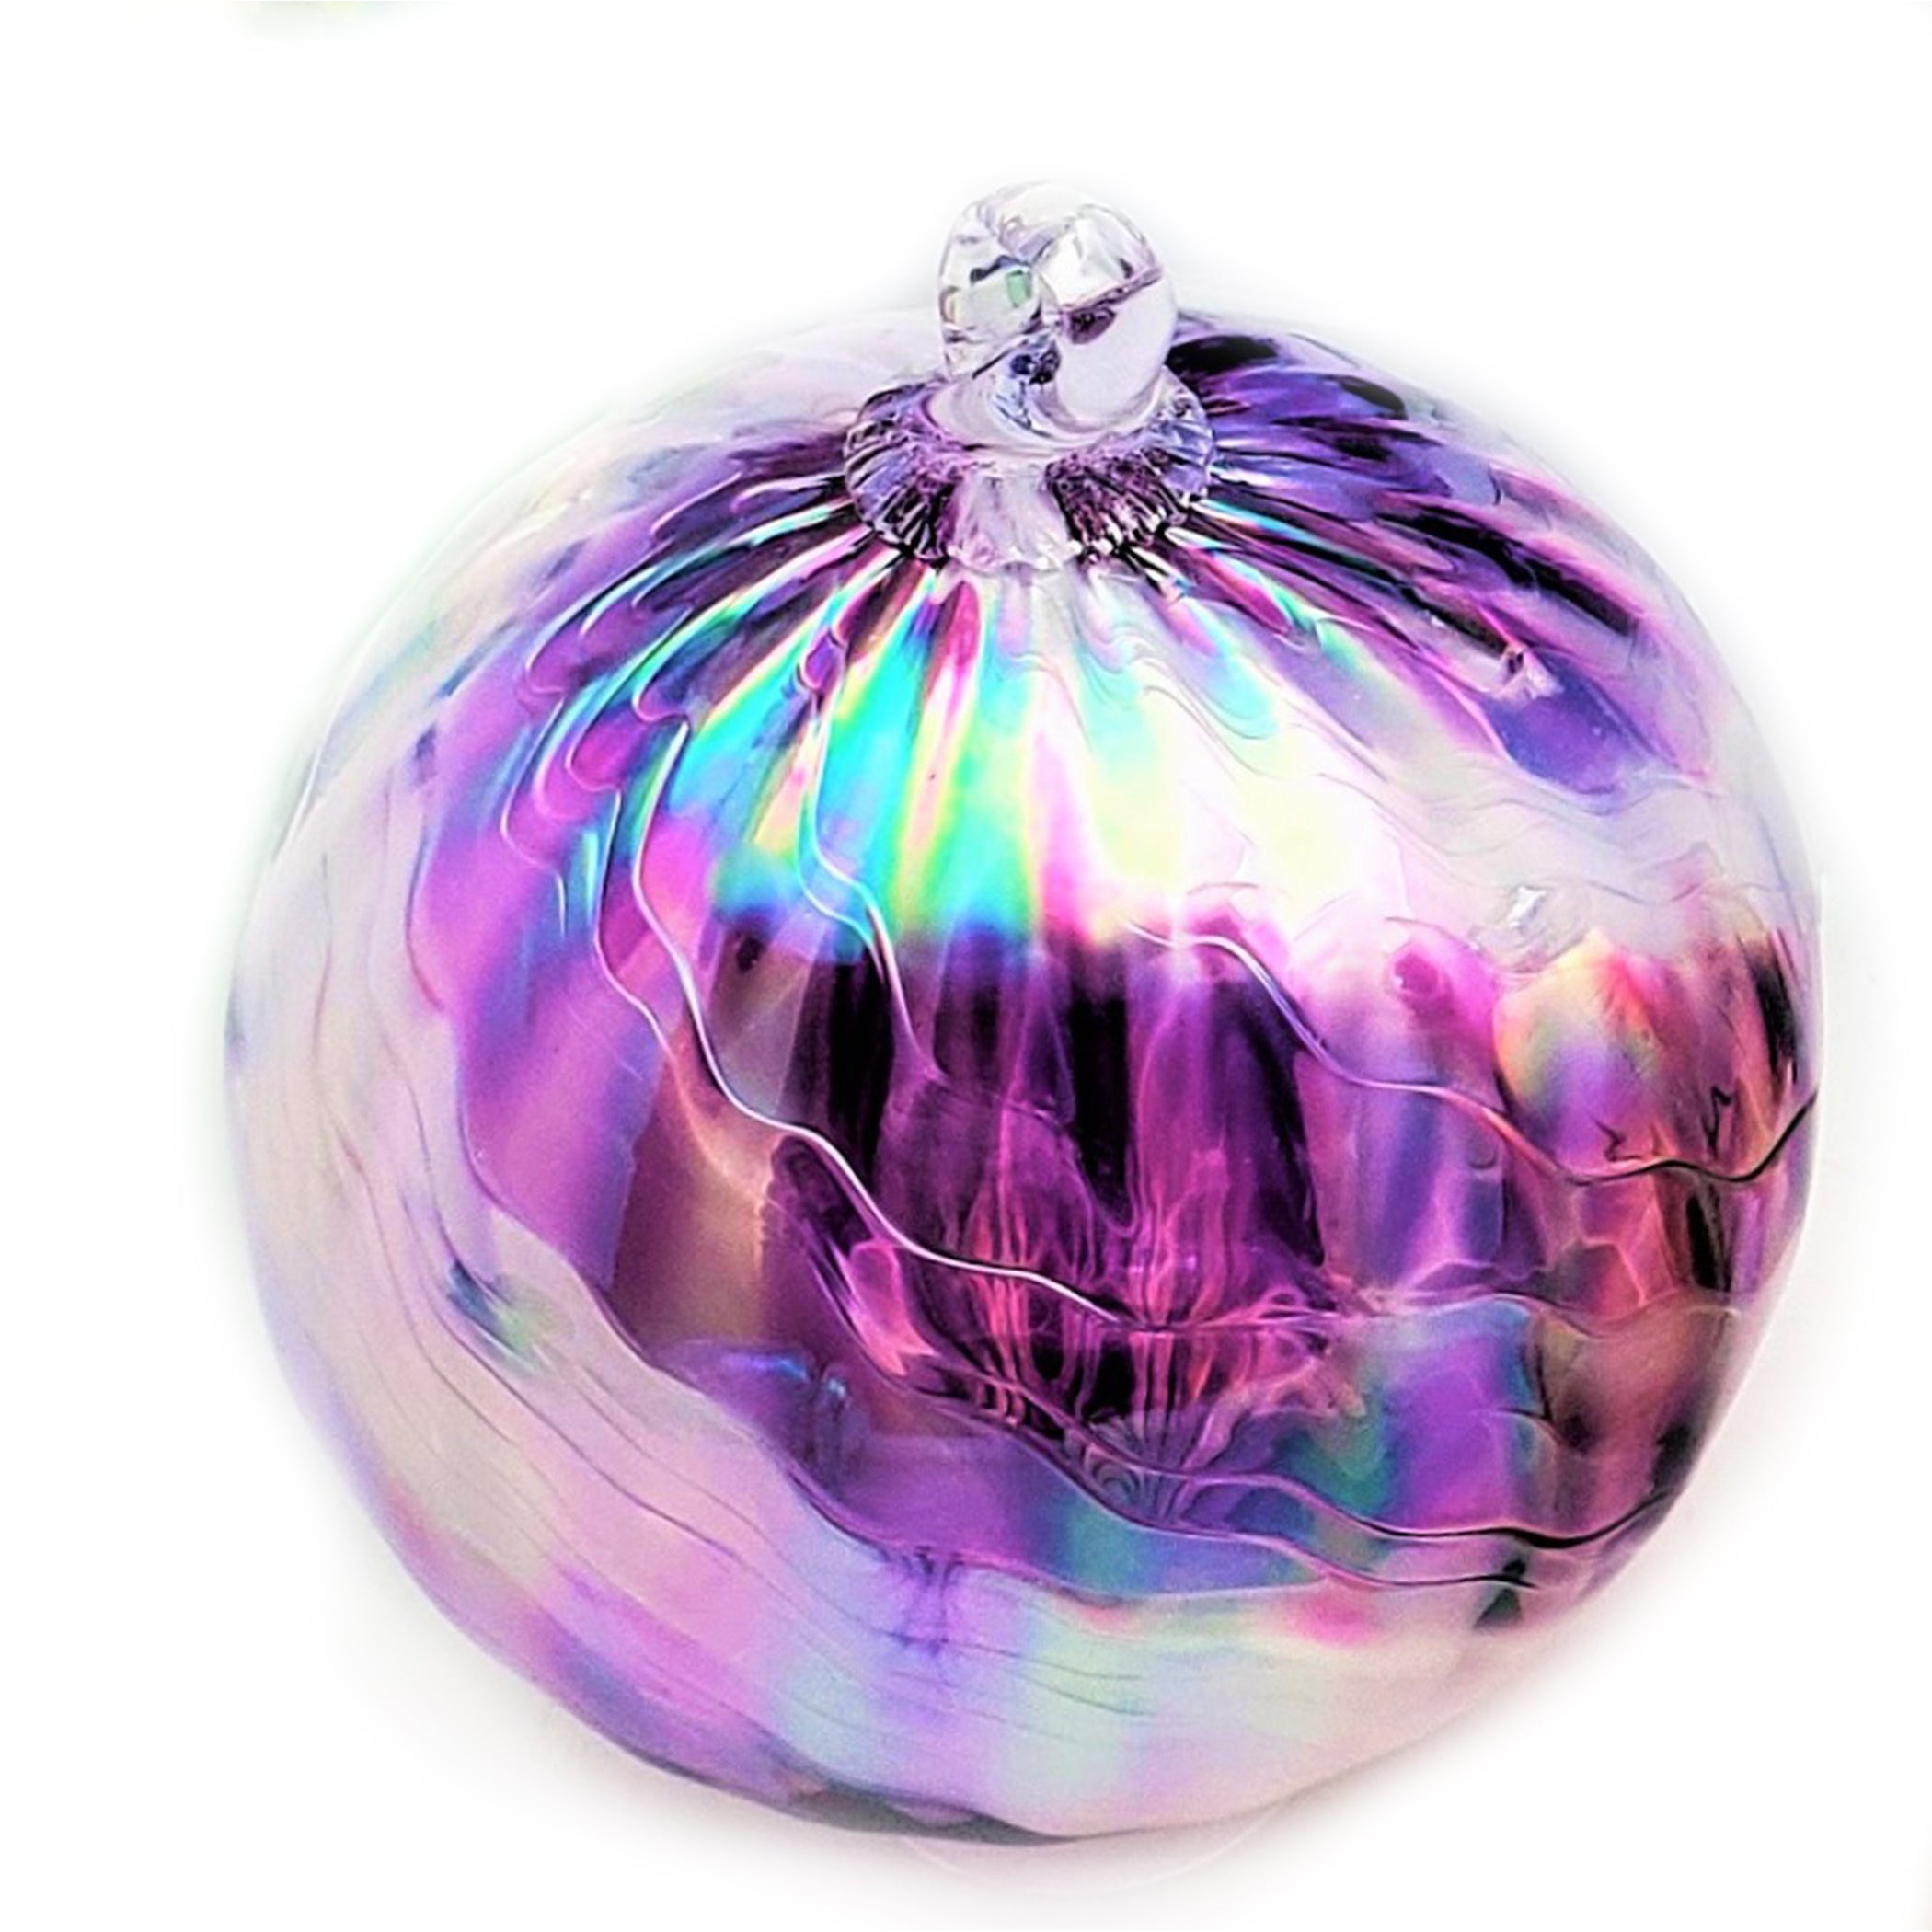 Striped Ornament - Large